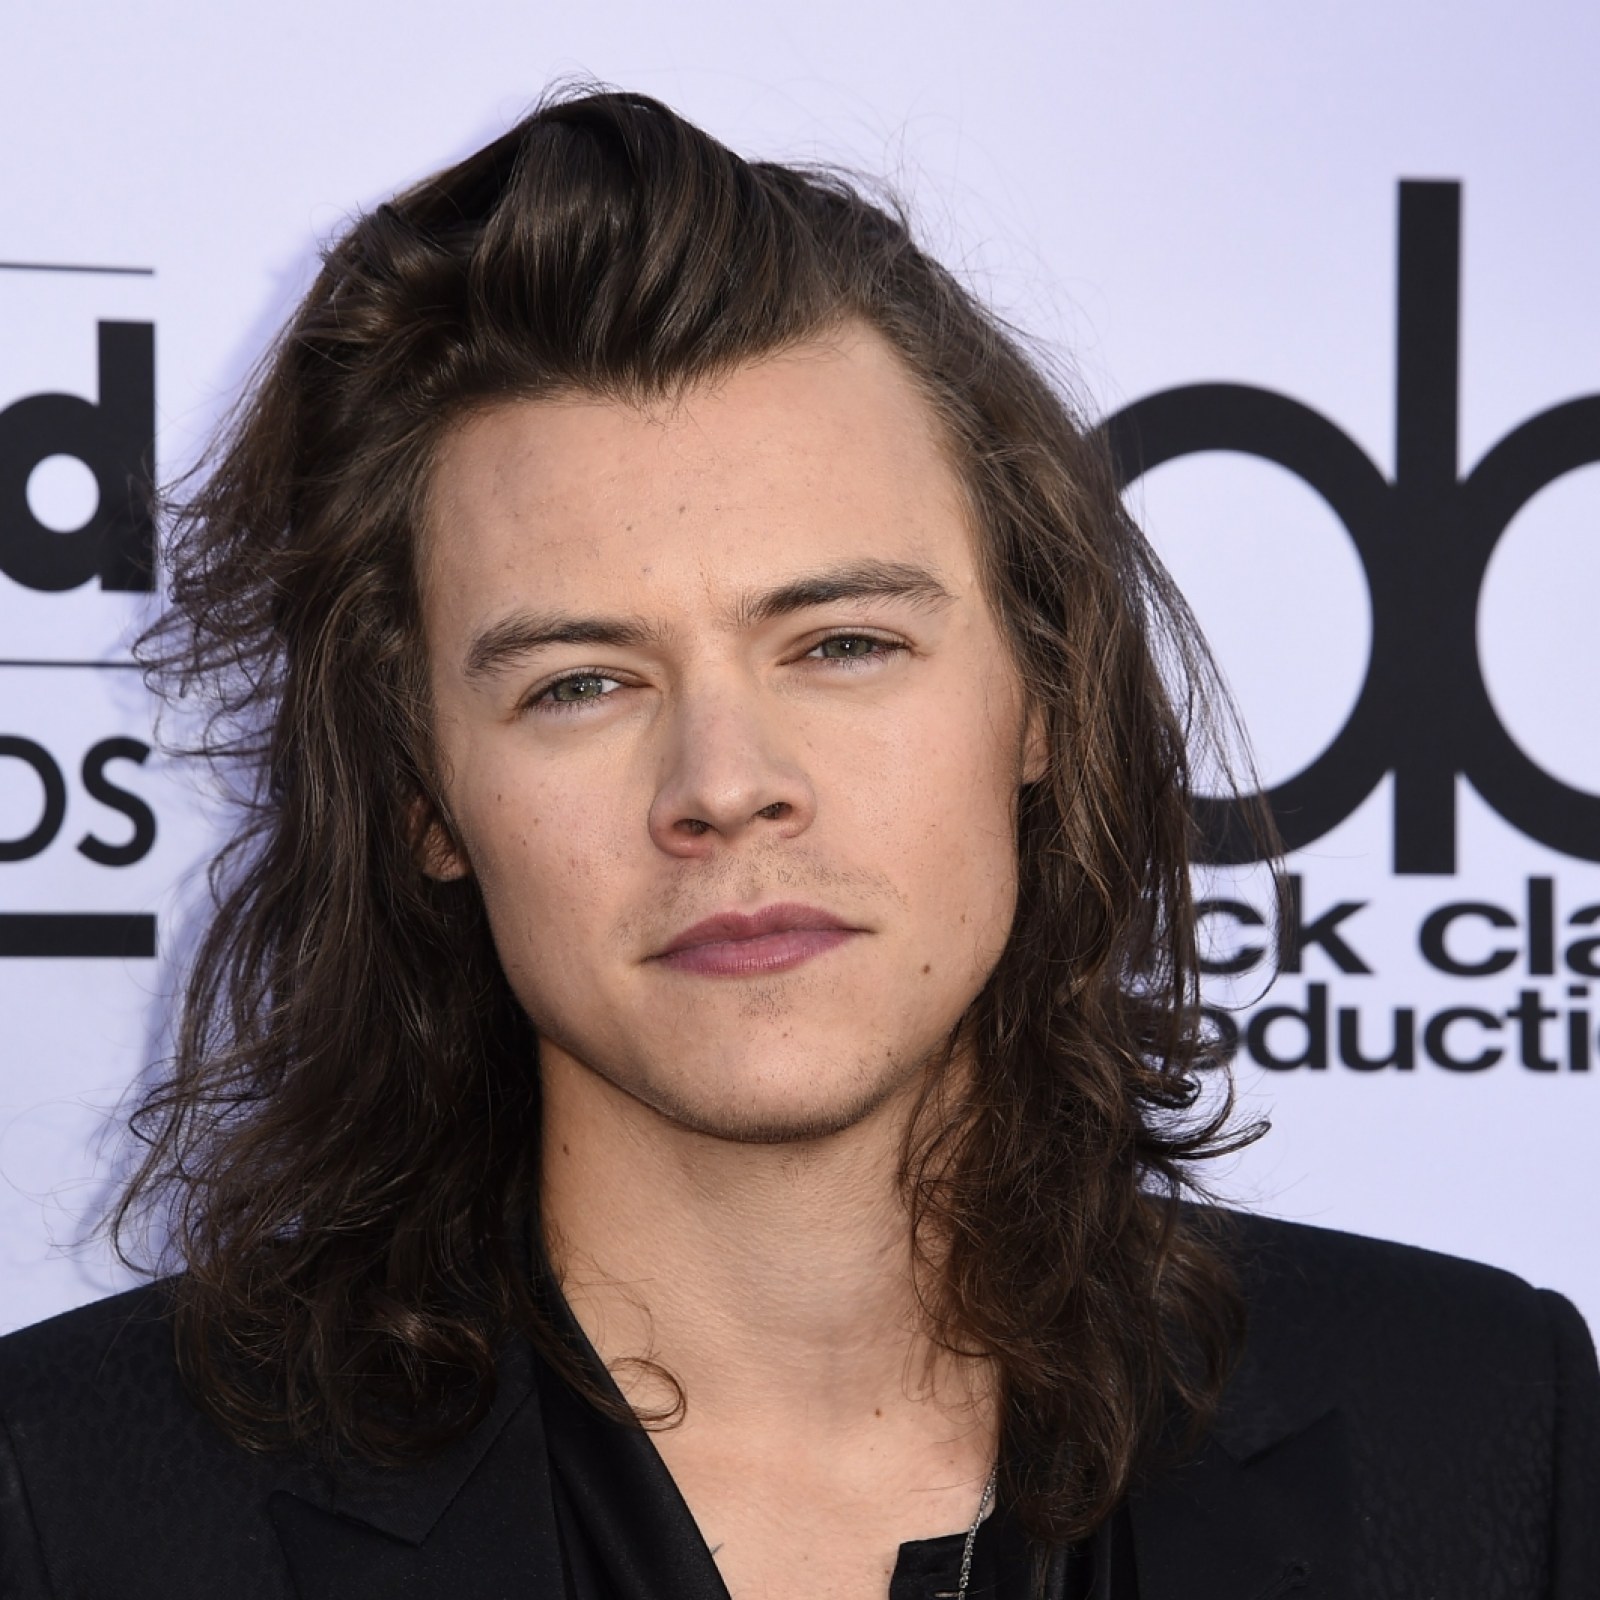 Harry Styles 23rd birthday: Dunkirk movie release, solo music career and  other upcoming highlights